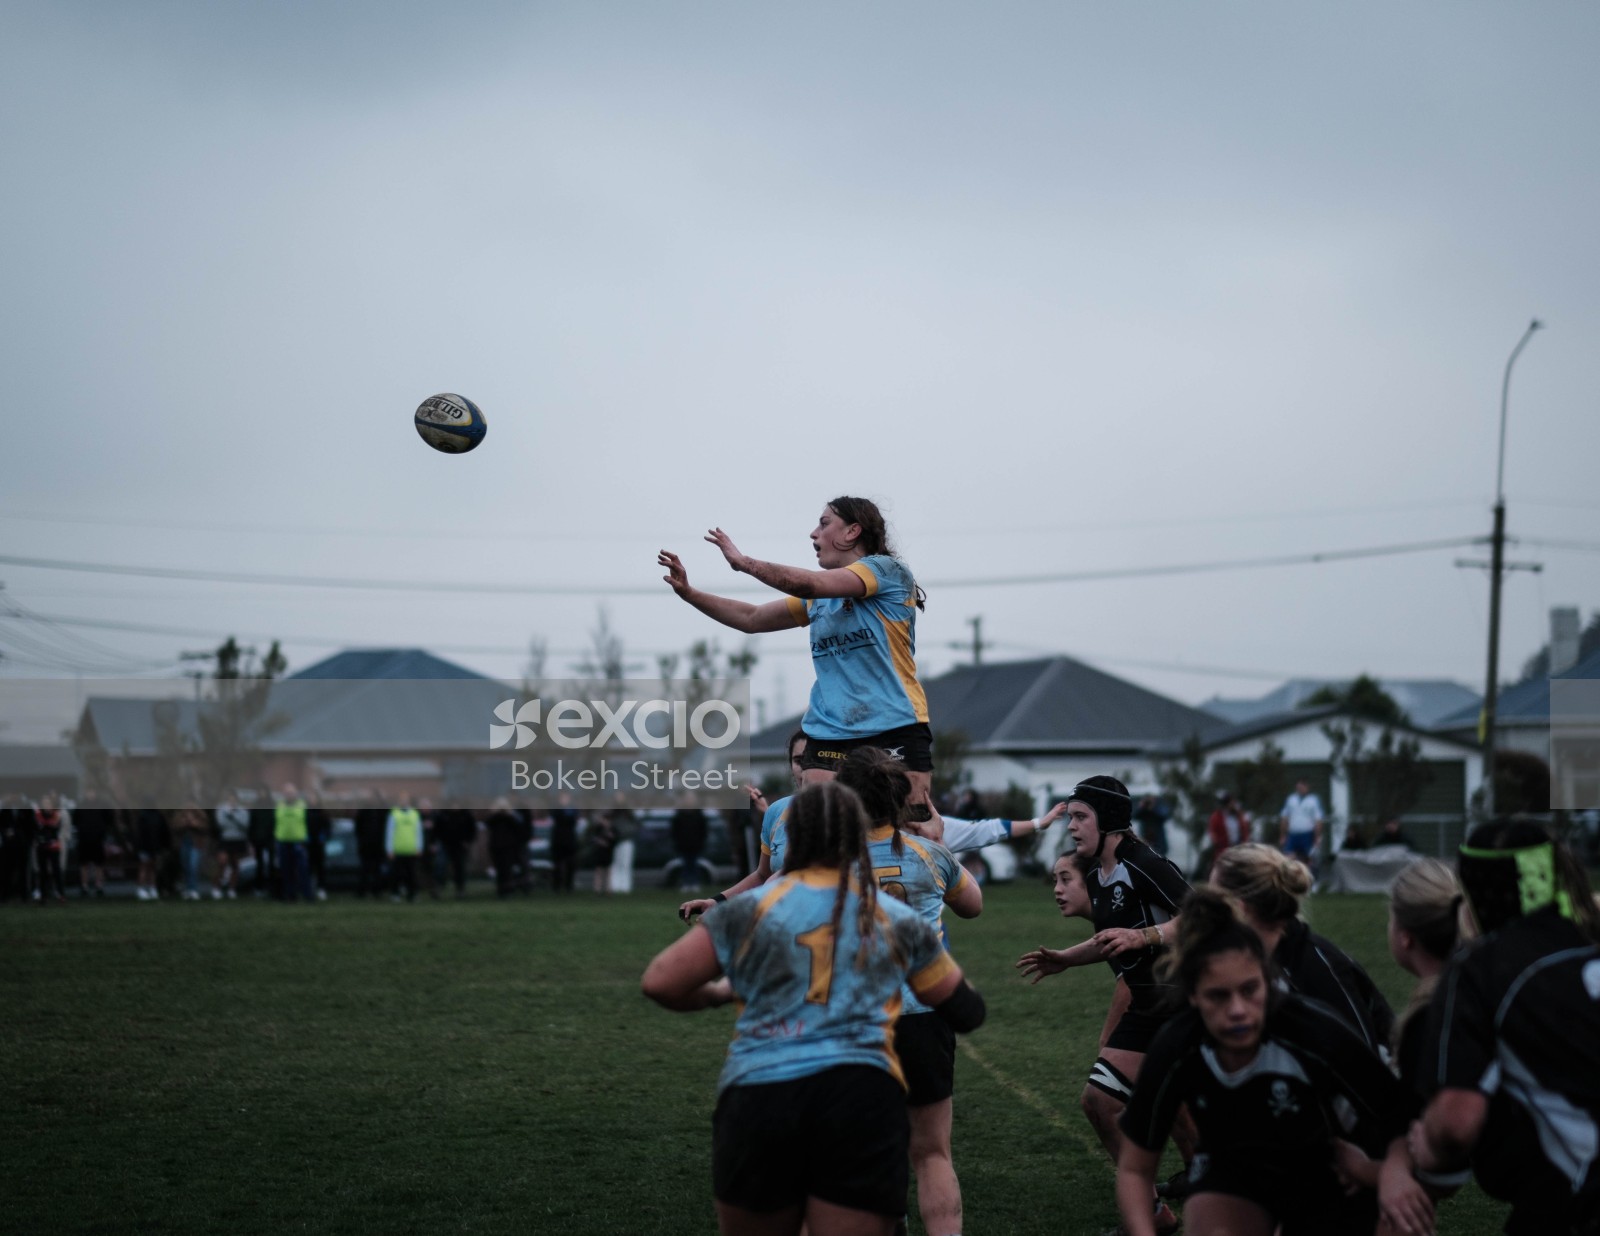 Women's rugby with ball in air